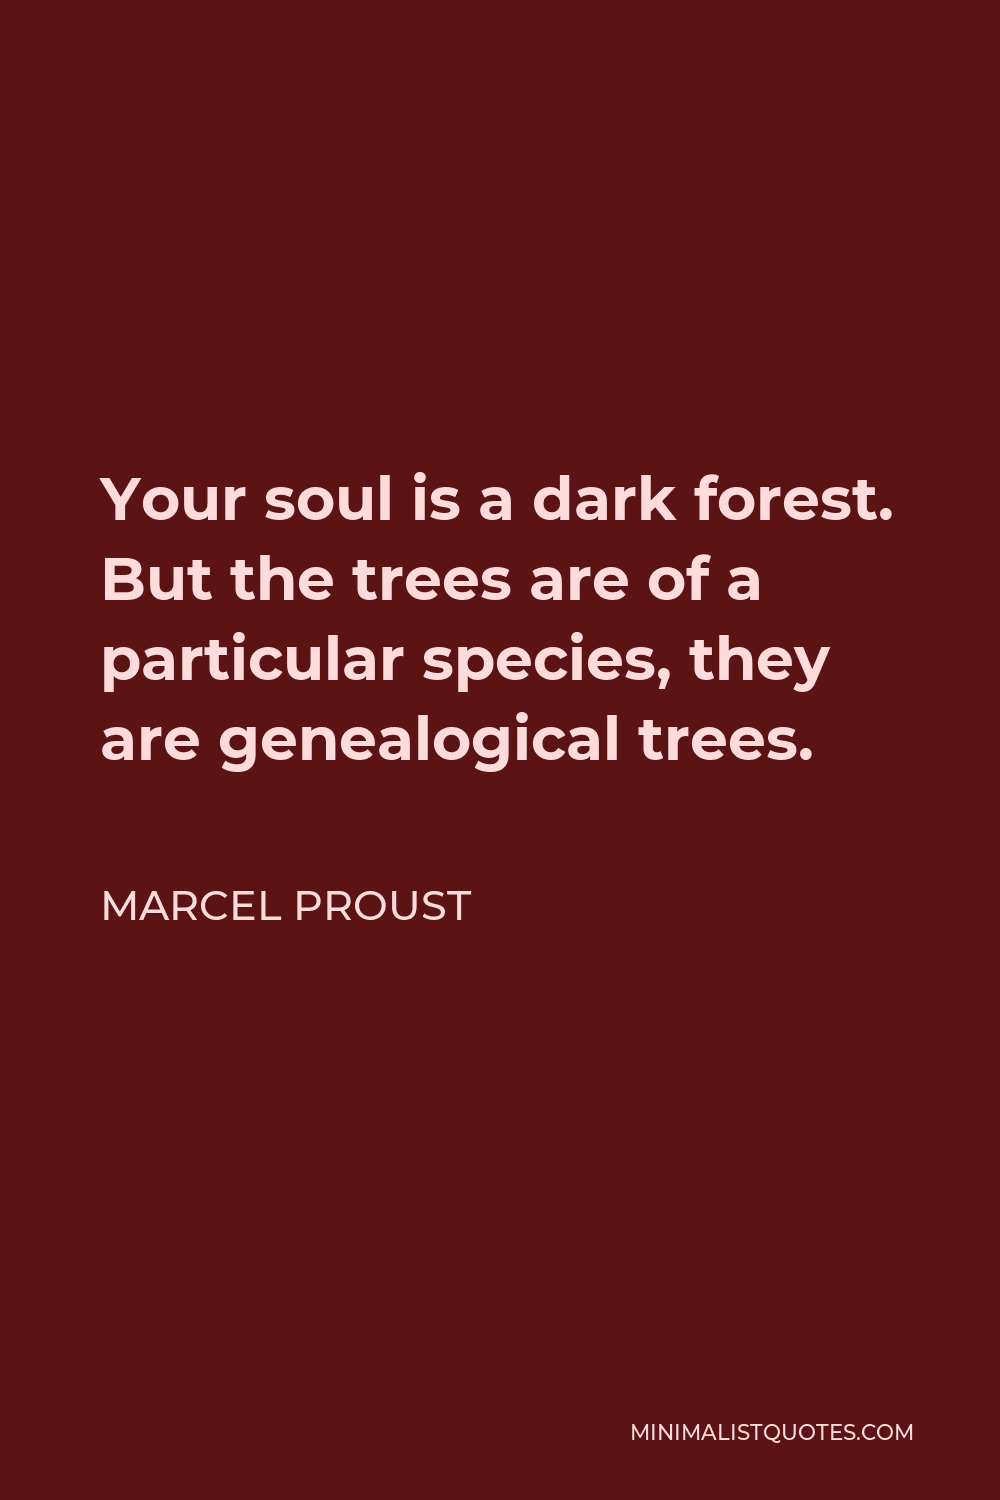 Marcel Proust Quote - Your soul is a dark forest. But the trees are of a particular species, they are genealogical trees.